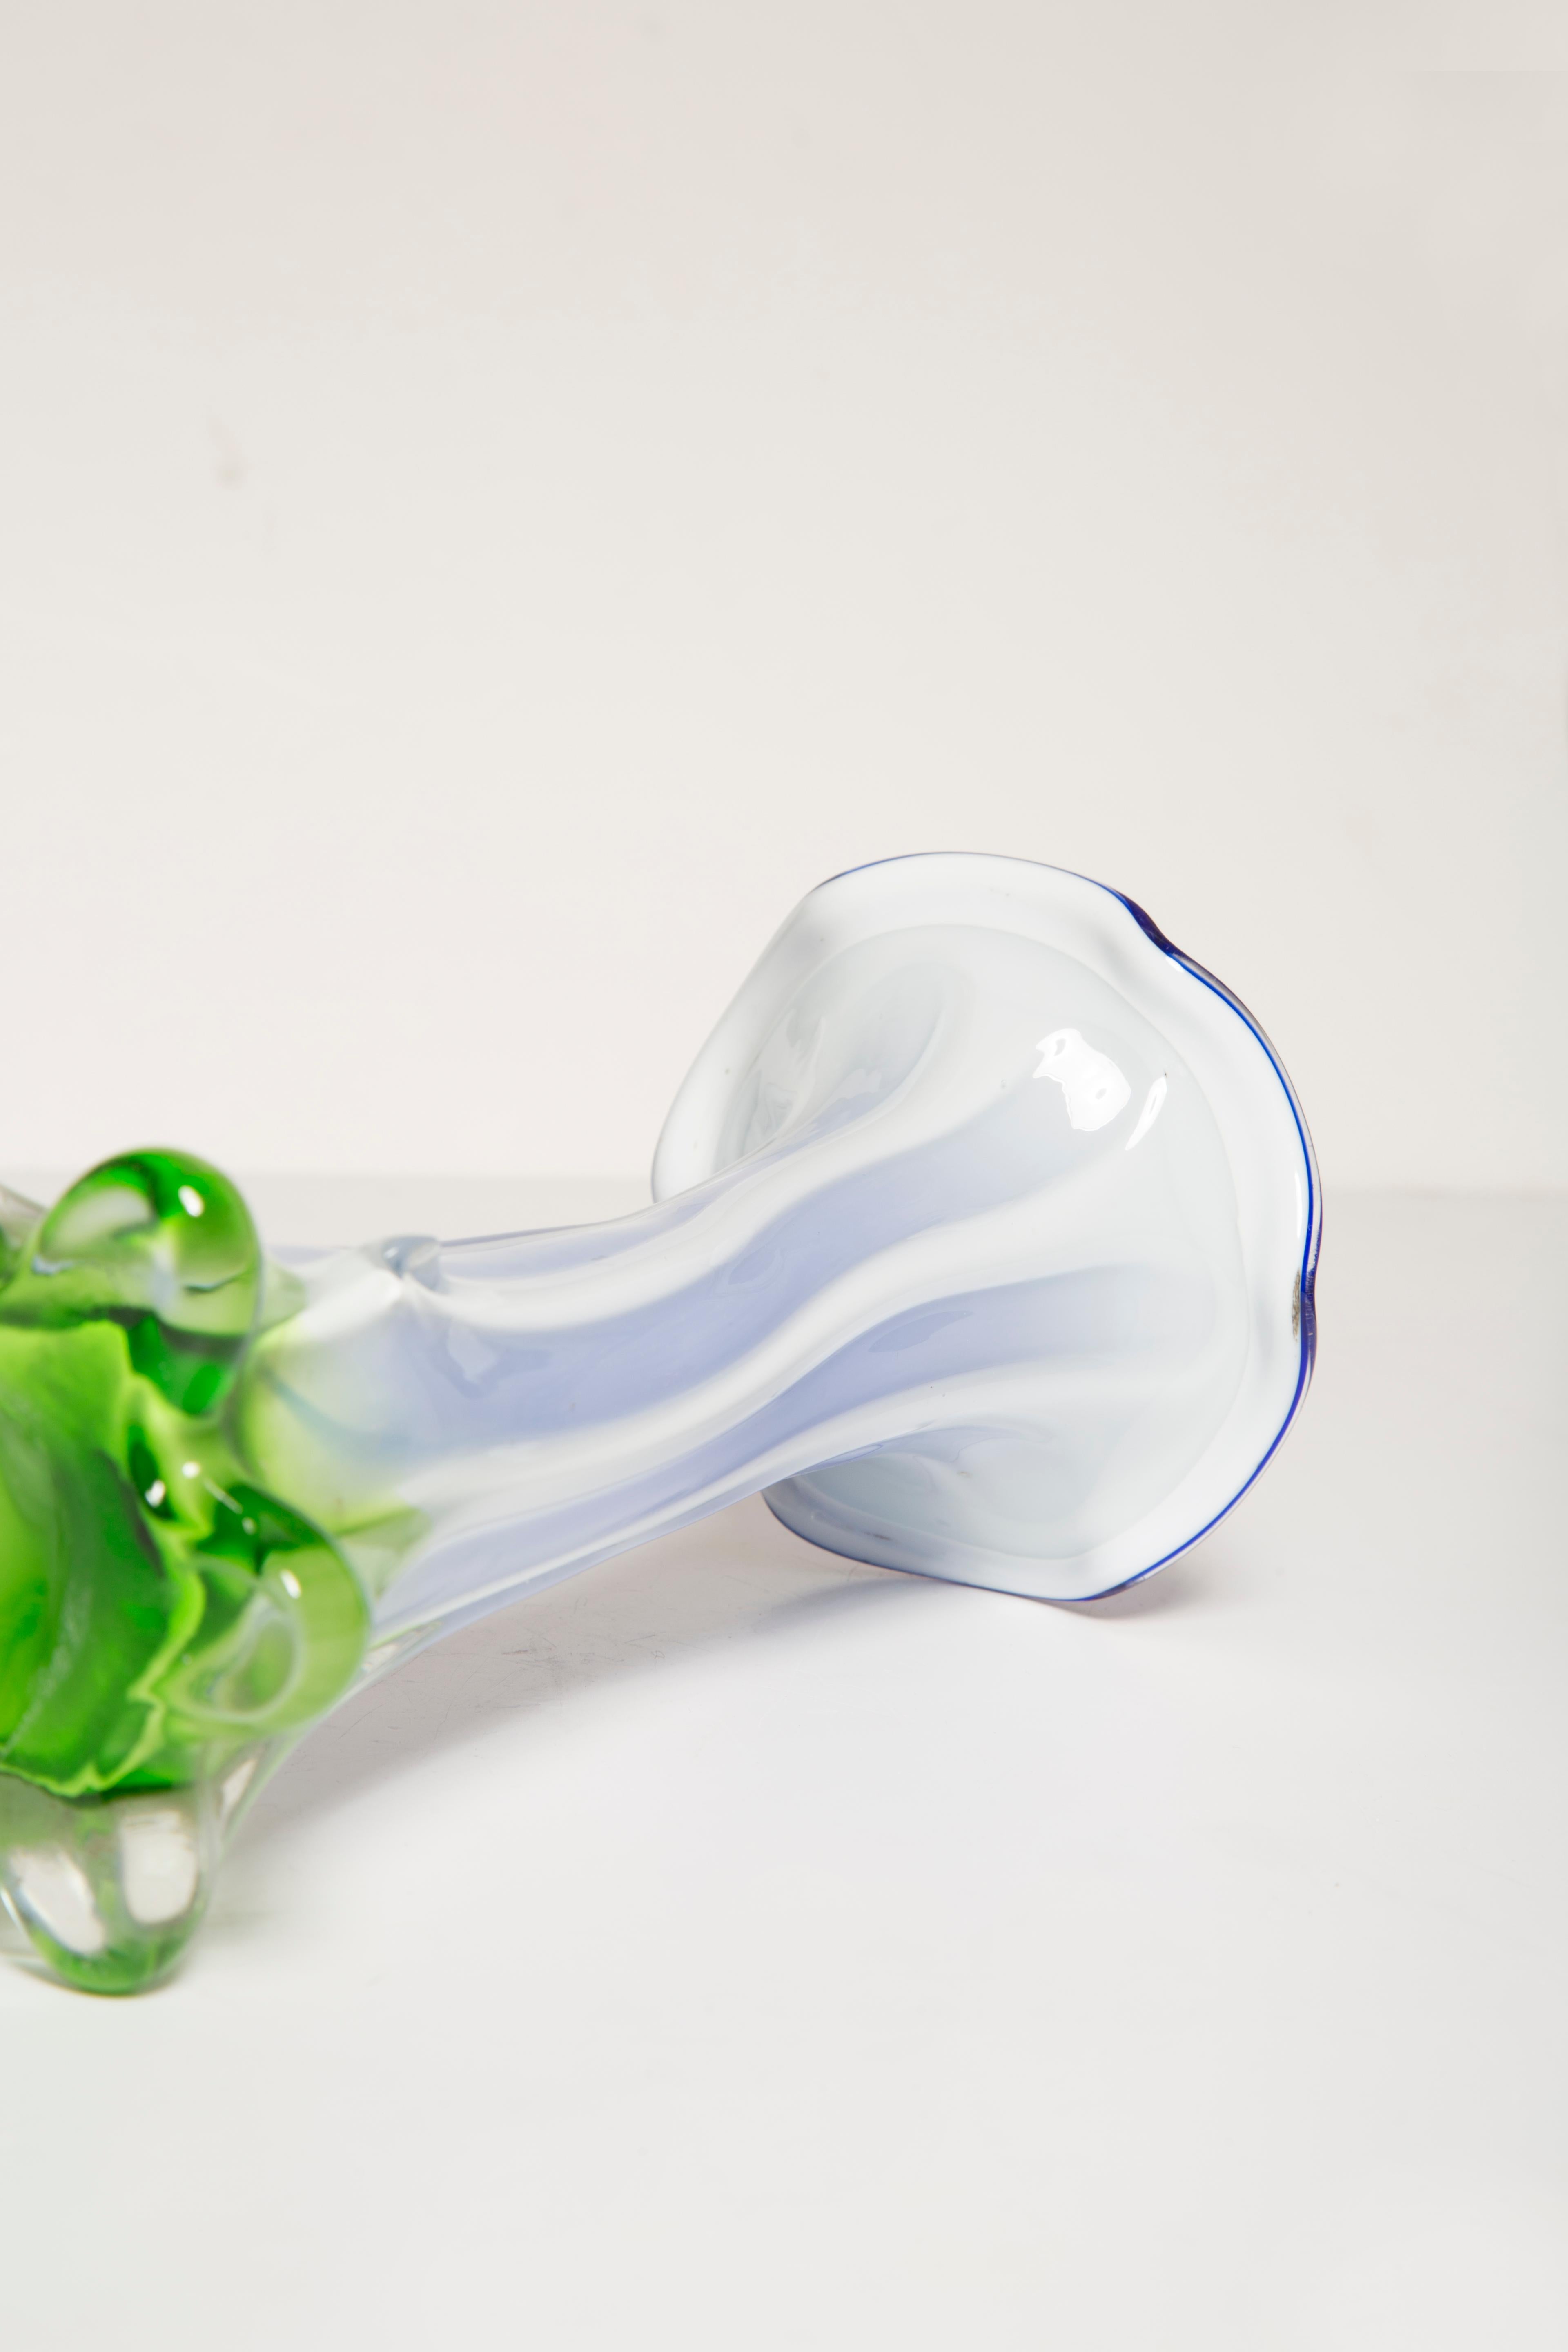 Mid Century Vintage Green and Blue Murano Vase, Italy, 1960s For Sale 5